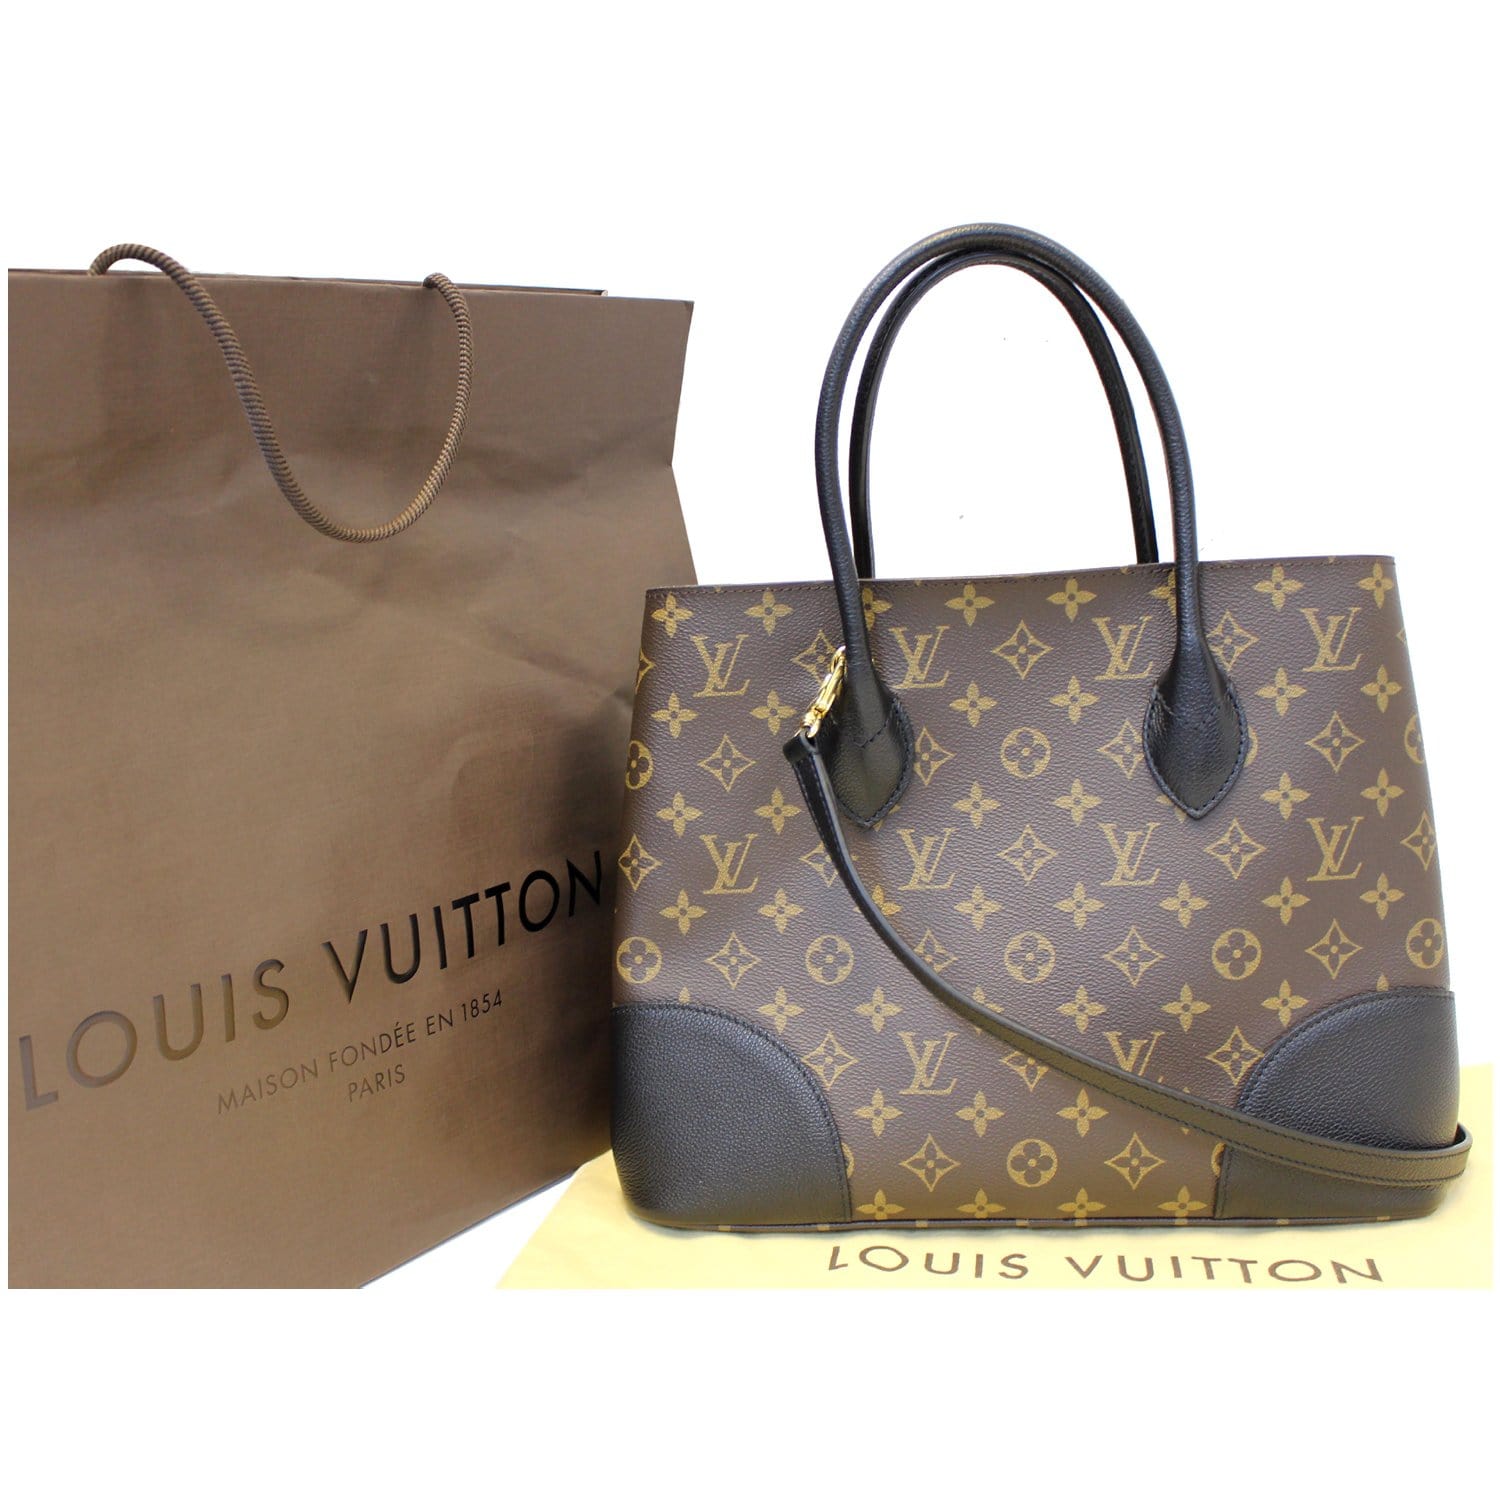 A First Look at the fragment design x Louis Vuitton Tote Bag and